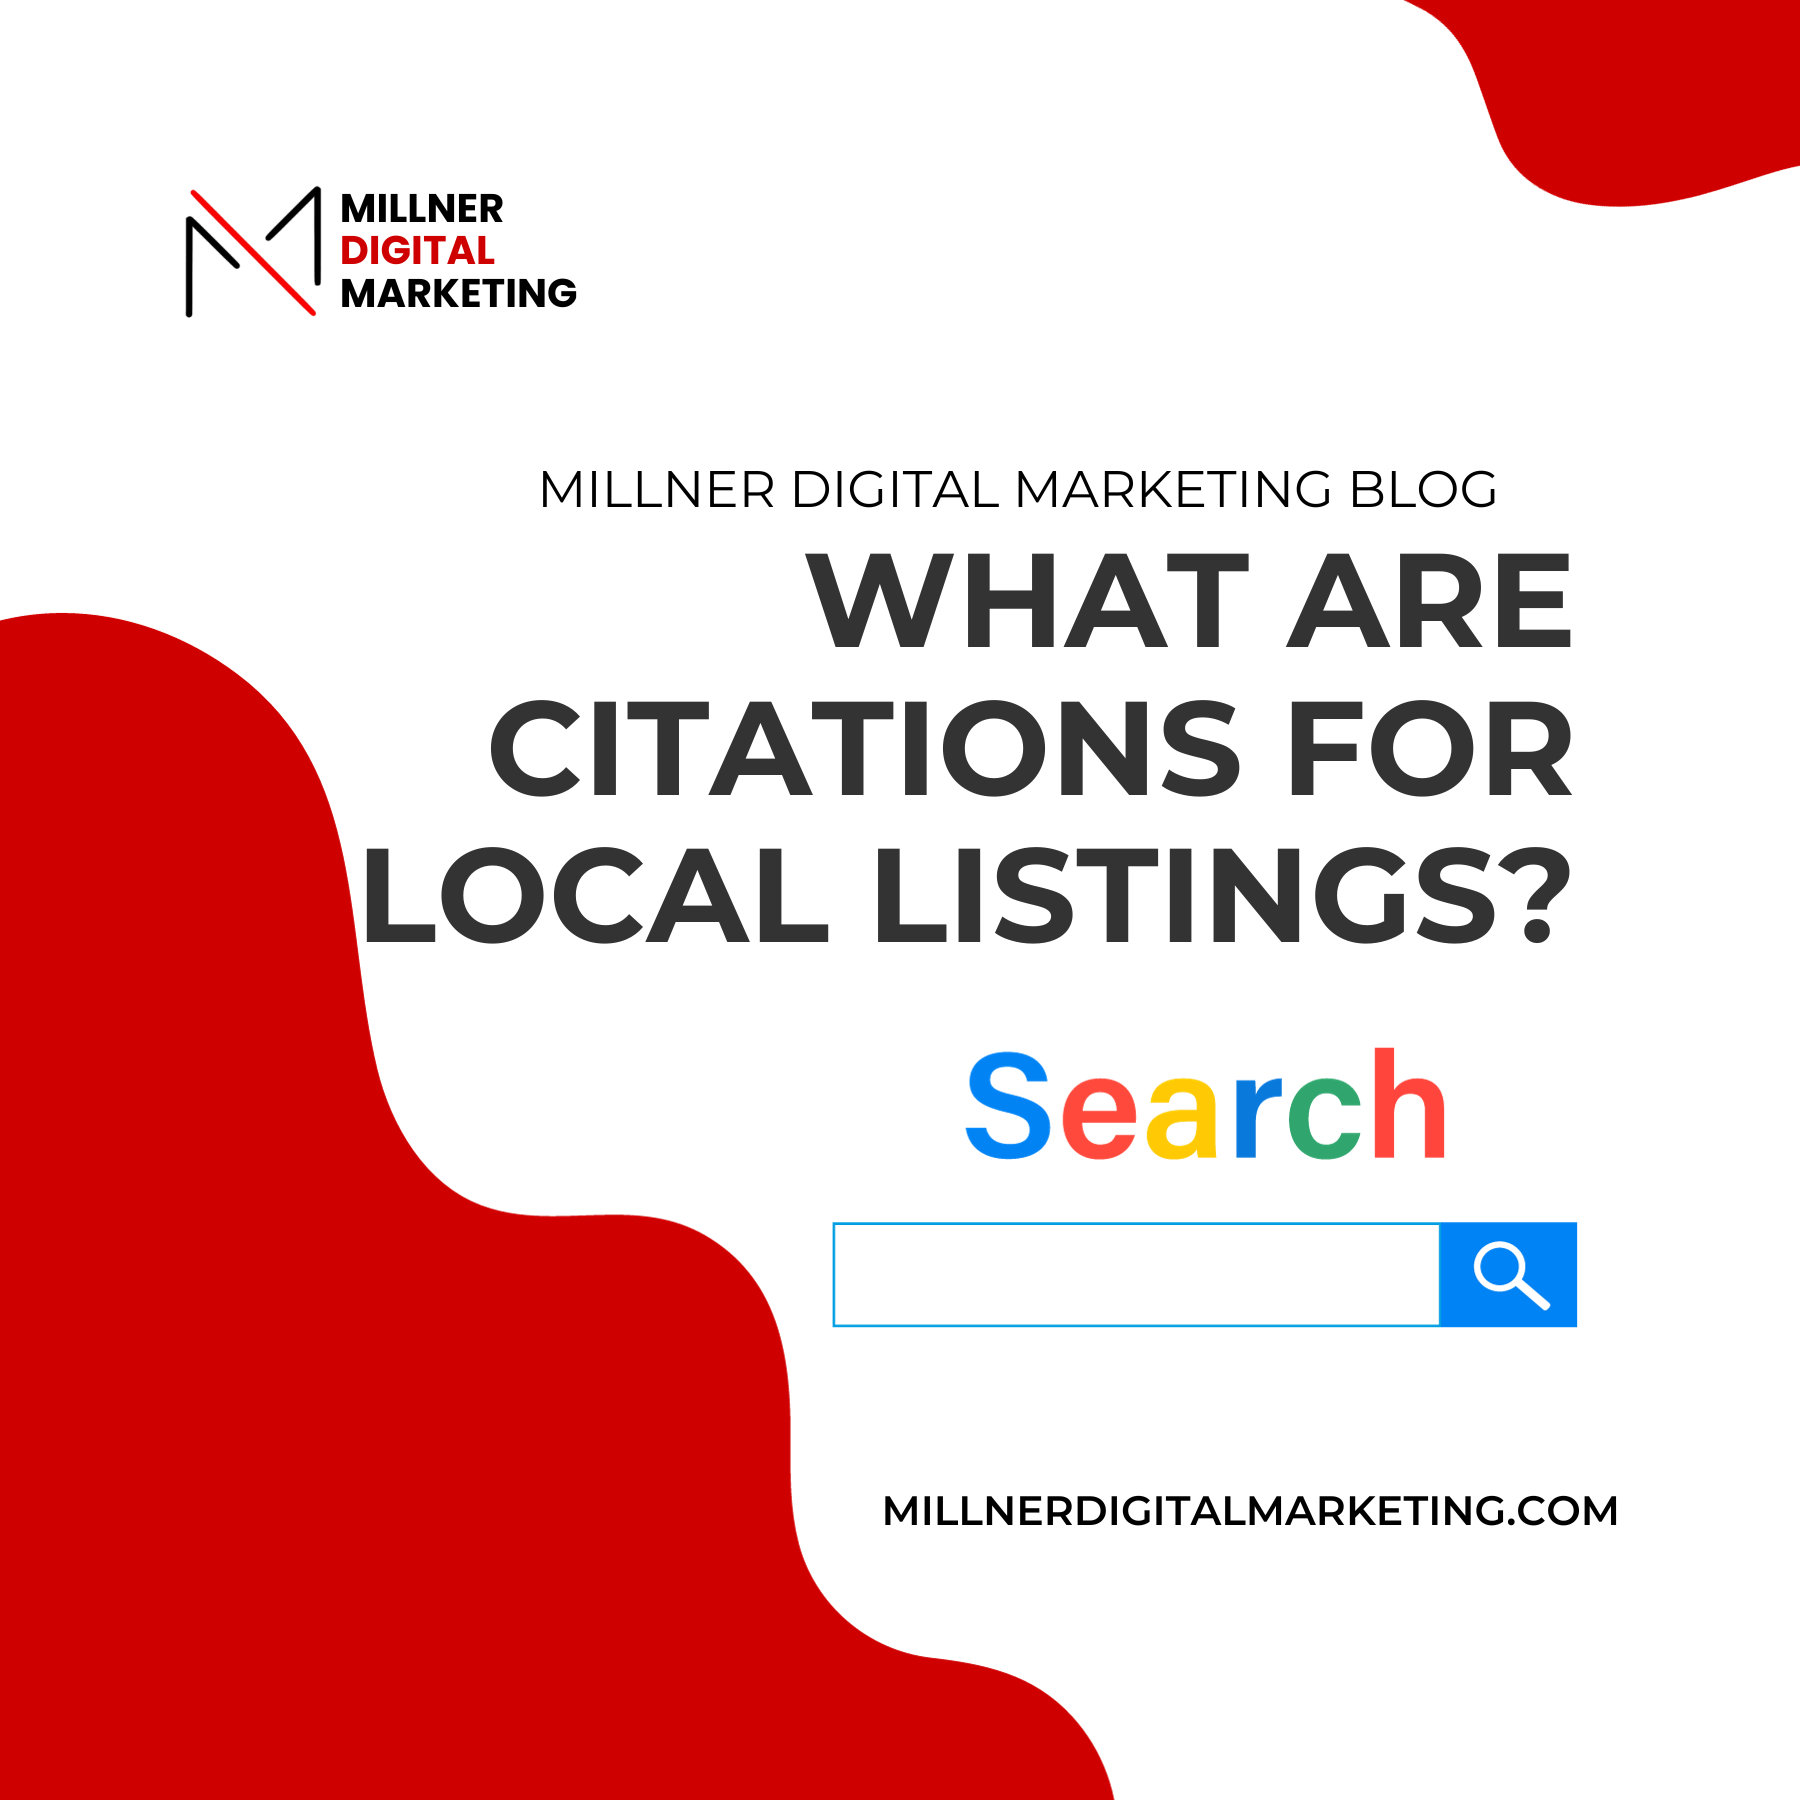 Photo of a blog post thumbnail which talks about Citations For Local Listings and their Importance